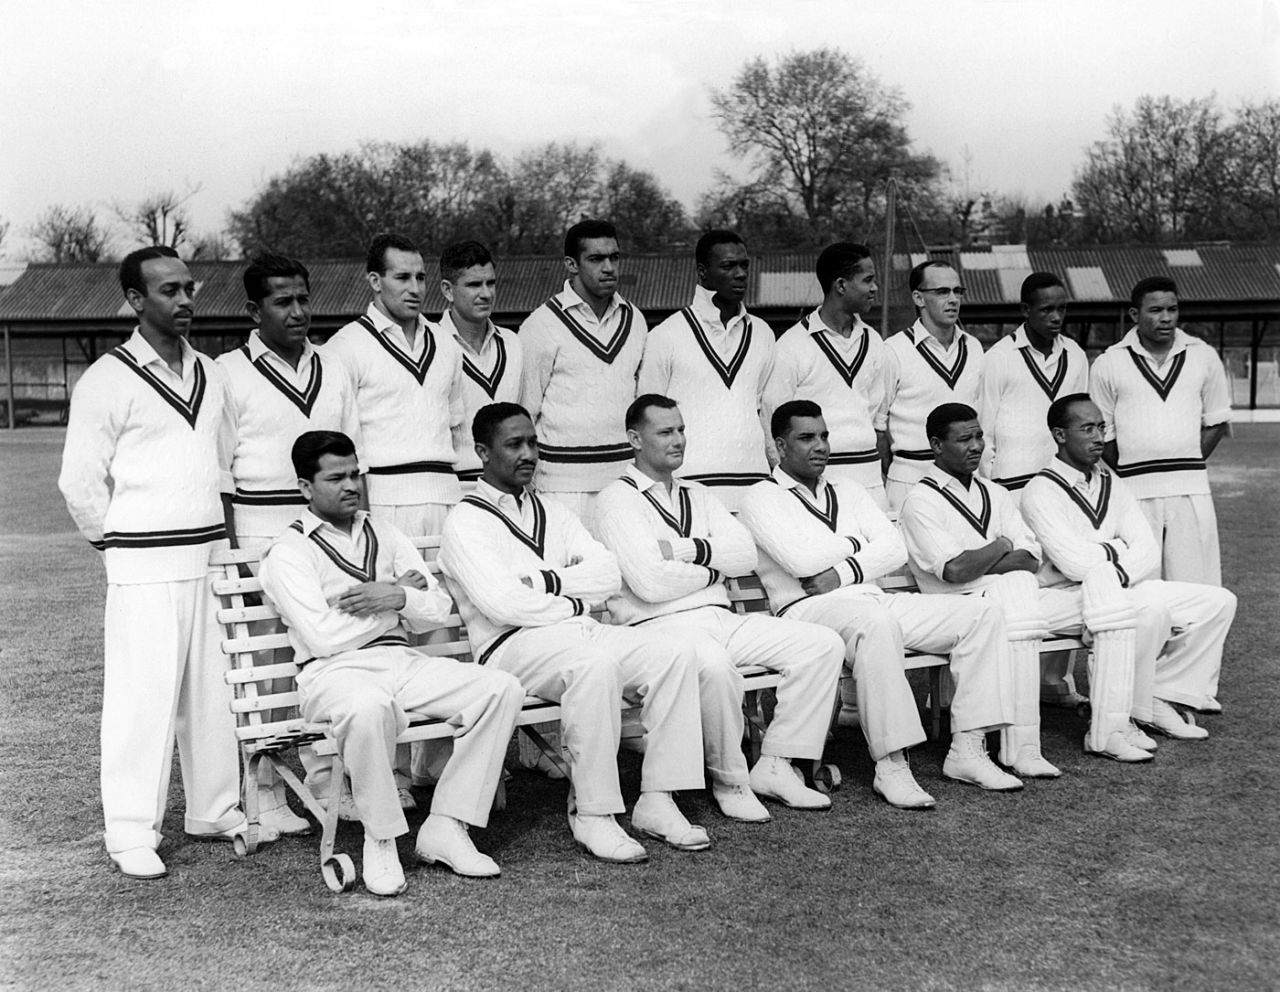 The West Indies touring party to England in 1957, England, April 1957